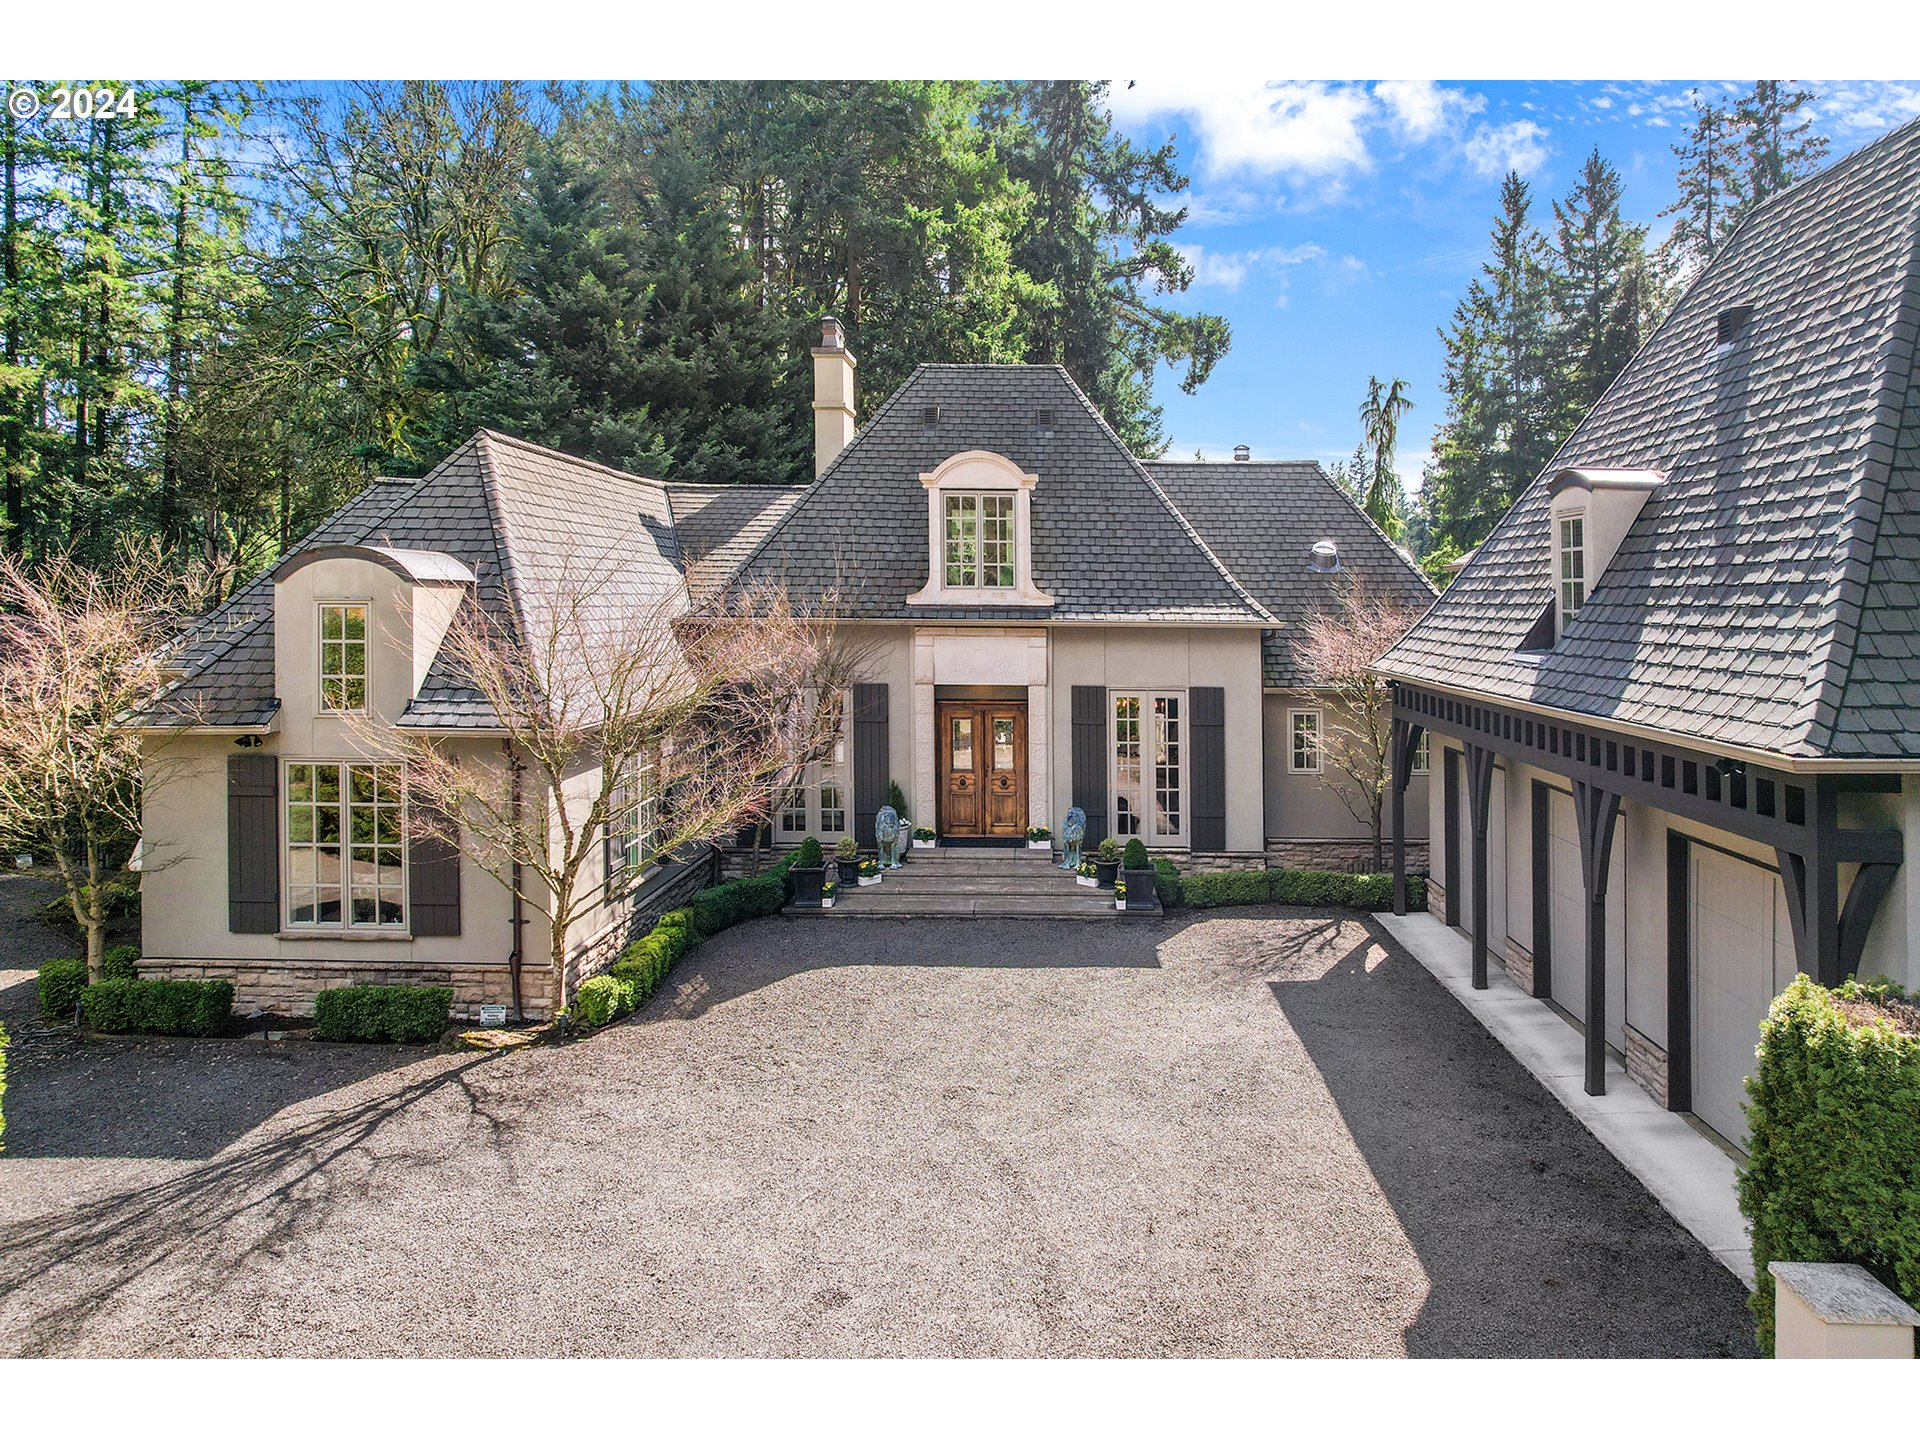 Location, Location, Location! This French Chateau-inspired estate is situated in the heart of Lake Oswego near the Downtown area with wonderful restaurants, shops & local businesses. The Oswego Lake Country Club is down the road and there are many trails and parks nearby. Forest Hills Lake Easement is a short walk & enjoyed with deeded access. In addition to being surrounded by other magnificent homes, this one-of-a-kind Estate has been renovated to the twenties in line with Chateauesque architecture; no detail has been overlooked. With antiques and imported pieces throughout, this home tells a story. After entering the courtyard through the electronic gates, you will begin to see the elegance of the home. Through the 300-year-old, imported wooden doors, open sight lines and natural light take you beyond the great room out to the breathtaking gardens, complete with raised beds and complimented by the sound of the water feature just beyond. This home combines sophistication and warmth. The owner's suite is on the main floor with French doors that lead to the gardens. The bathroom is exquisite with marble finishes, custom built-in cabinets, and a closet beyond words. Two additional bedrooms & a bathroom are upstairs. Guest quarters on the opposite side of the home with a bedroom, sitting area, full bathroom & laundry accommodations. The exceptional gourmet kitchen is complete with Danby marble that extends beyond the counters and up the walls. Beautiful custom cabinets with many built-ins provide extensive storage. The light fixtures throughout are exquisite. Beyond the kitchen & through the French doors, you will enjoy a charming, covered patio with beautiful lighting, overhead heaters, and a fireplace complete with gas logs. It can be enjoyed all year long. This beautifully designed area of the nearly half acre property overlooks the gardens and offers a sense of peace & serenity, a true piece of paradise.